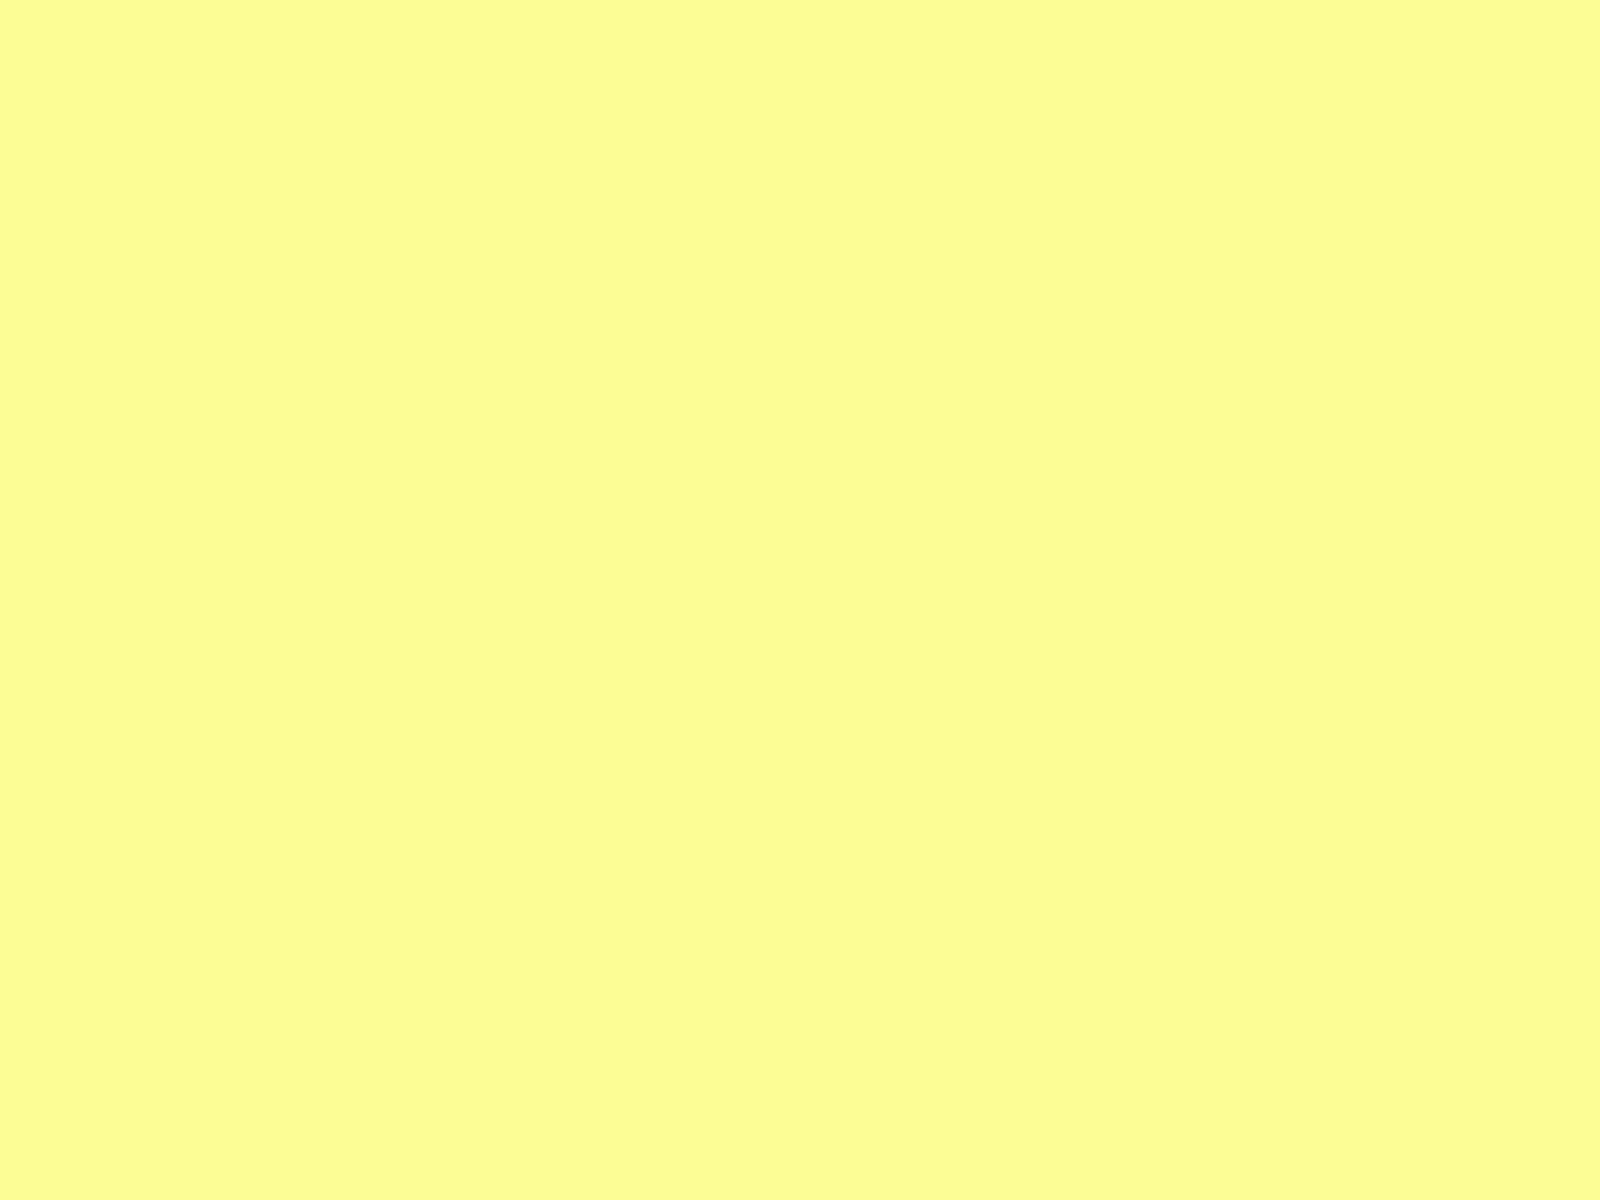 Download 1600x1200 Pastel Yellow Solid Color Background